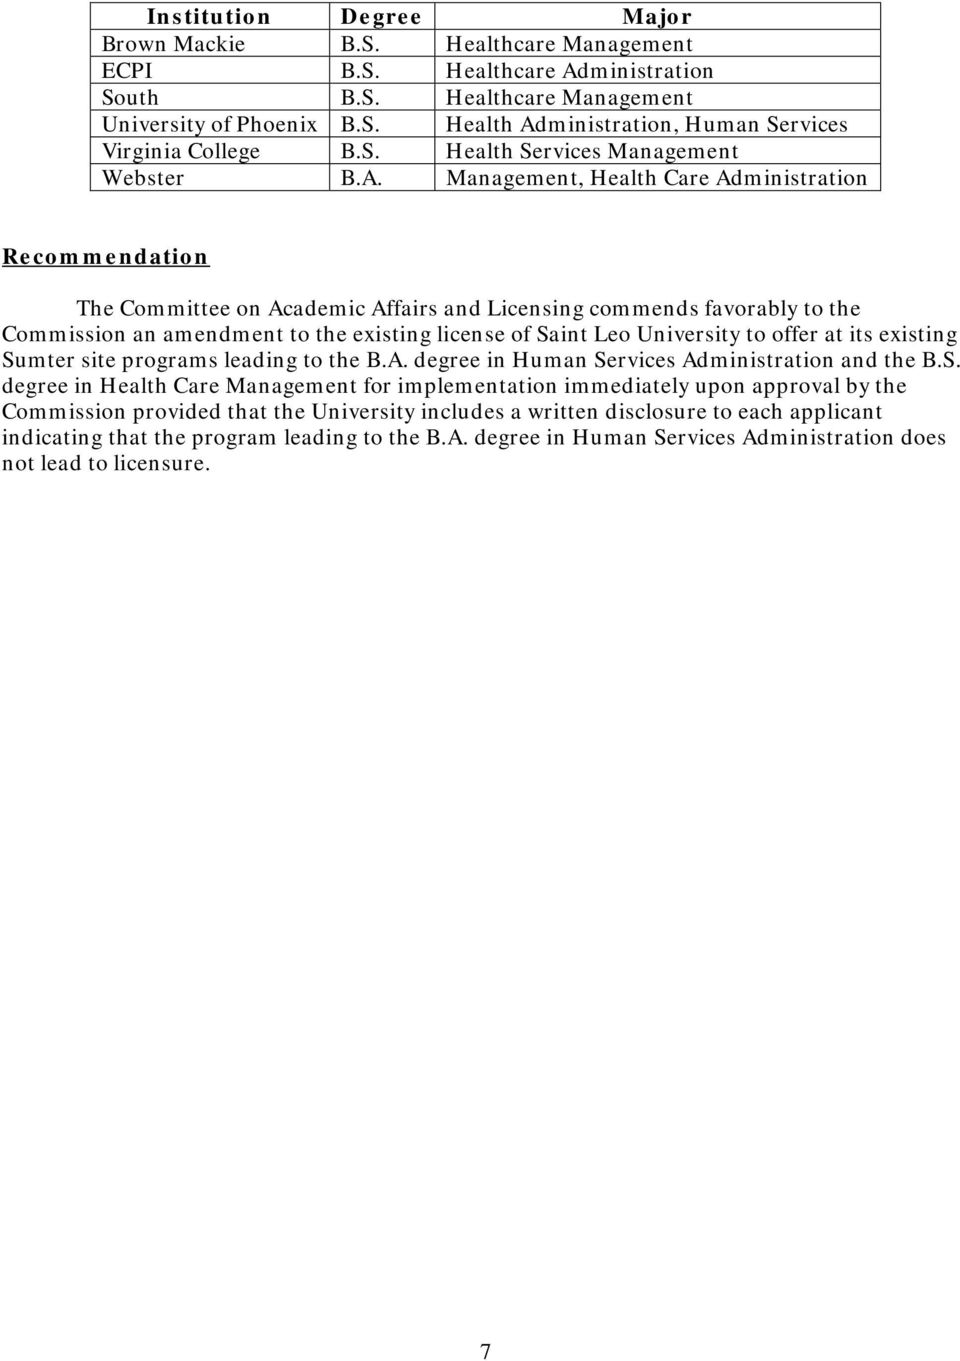 Management, Health Care Administration Recommendation The Committee on Academic Affairs and Licensing commends favorably to the Commission an amendment to the existing license of Saint Leo University